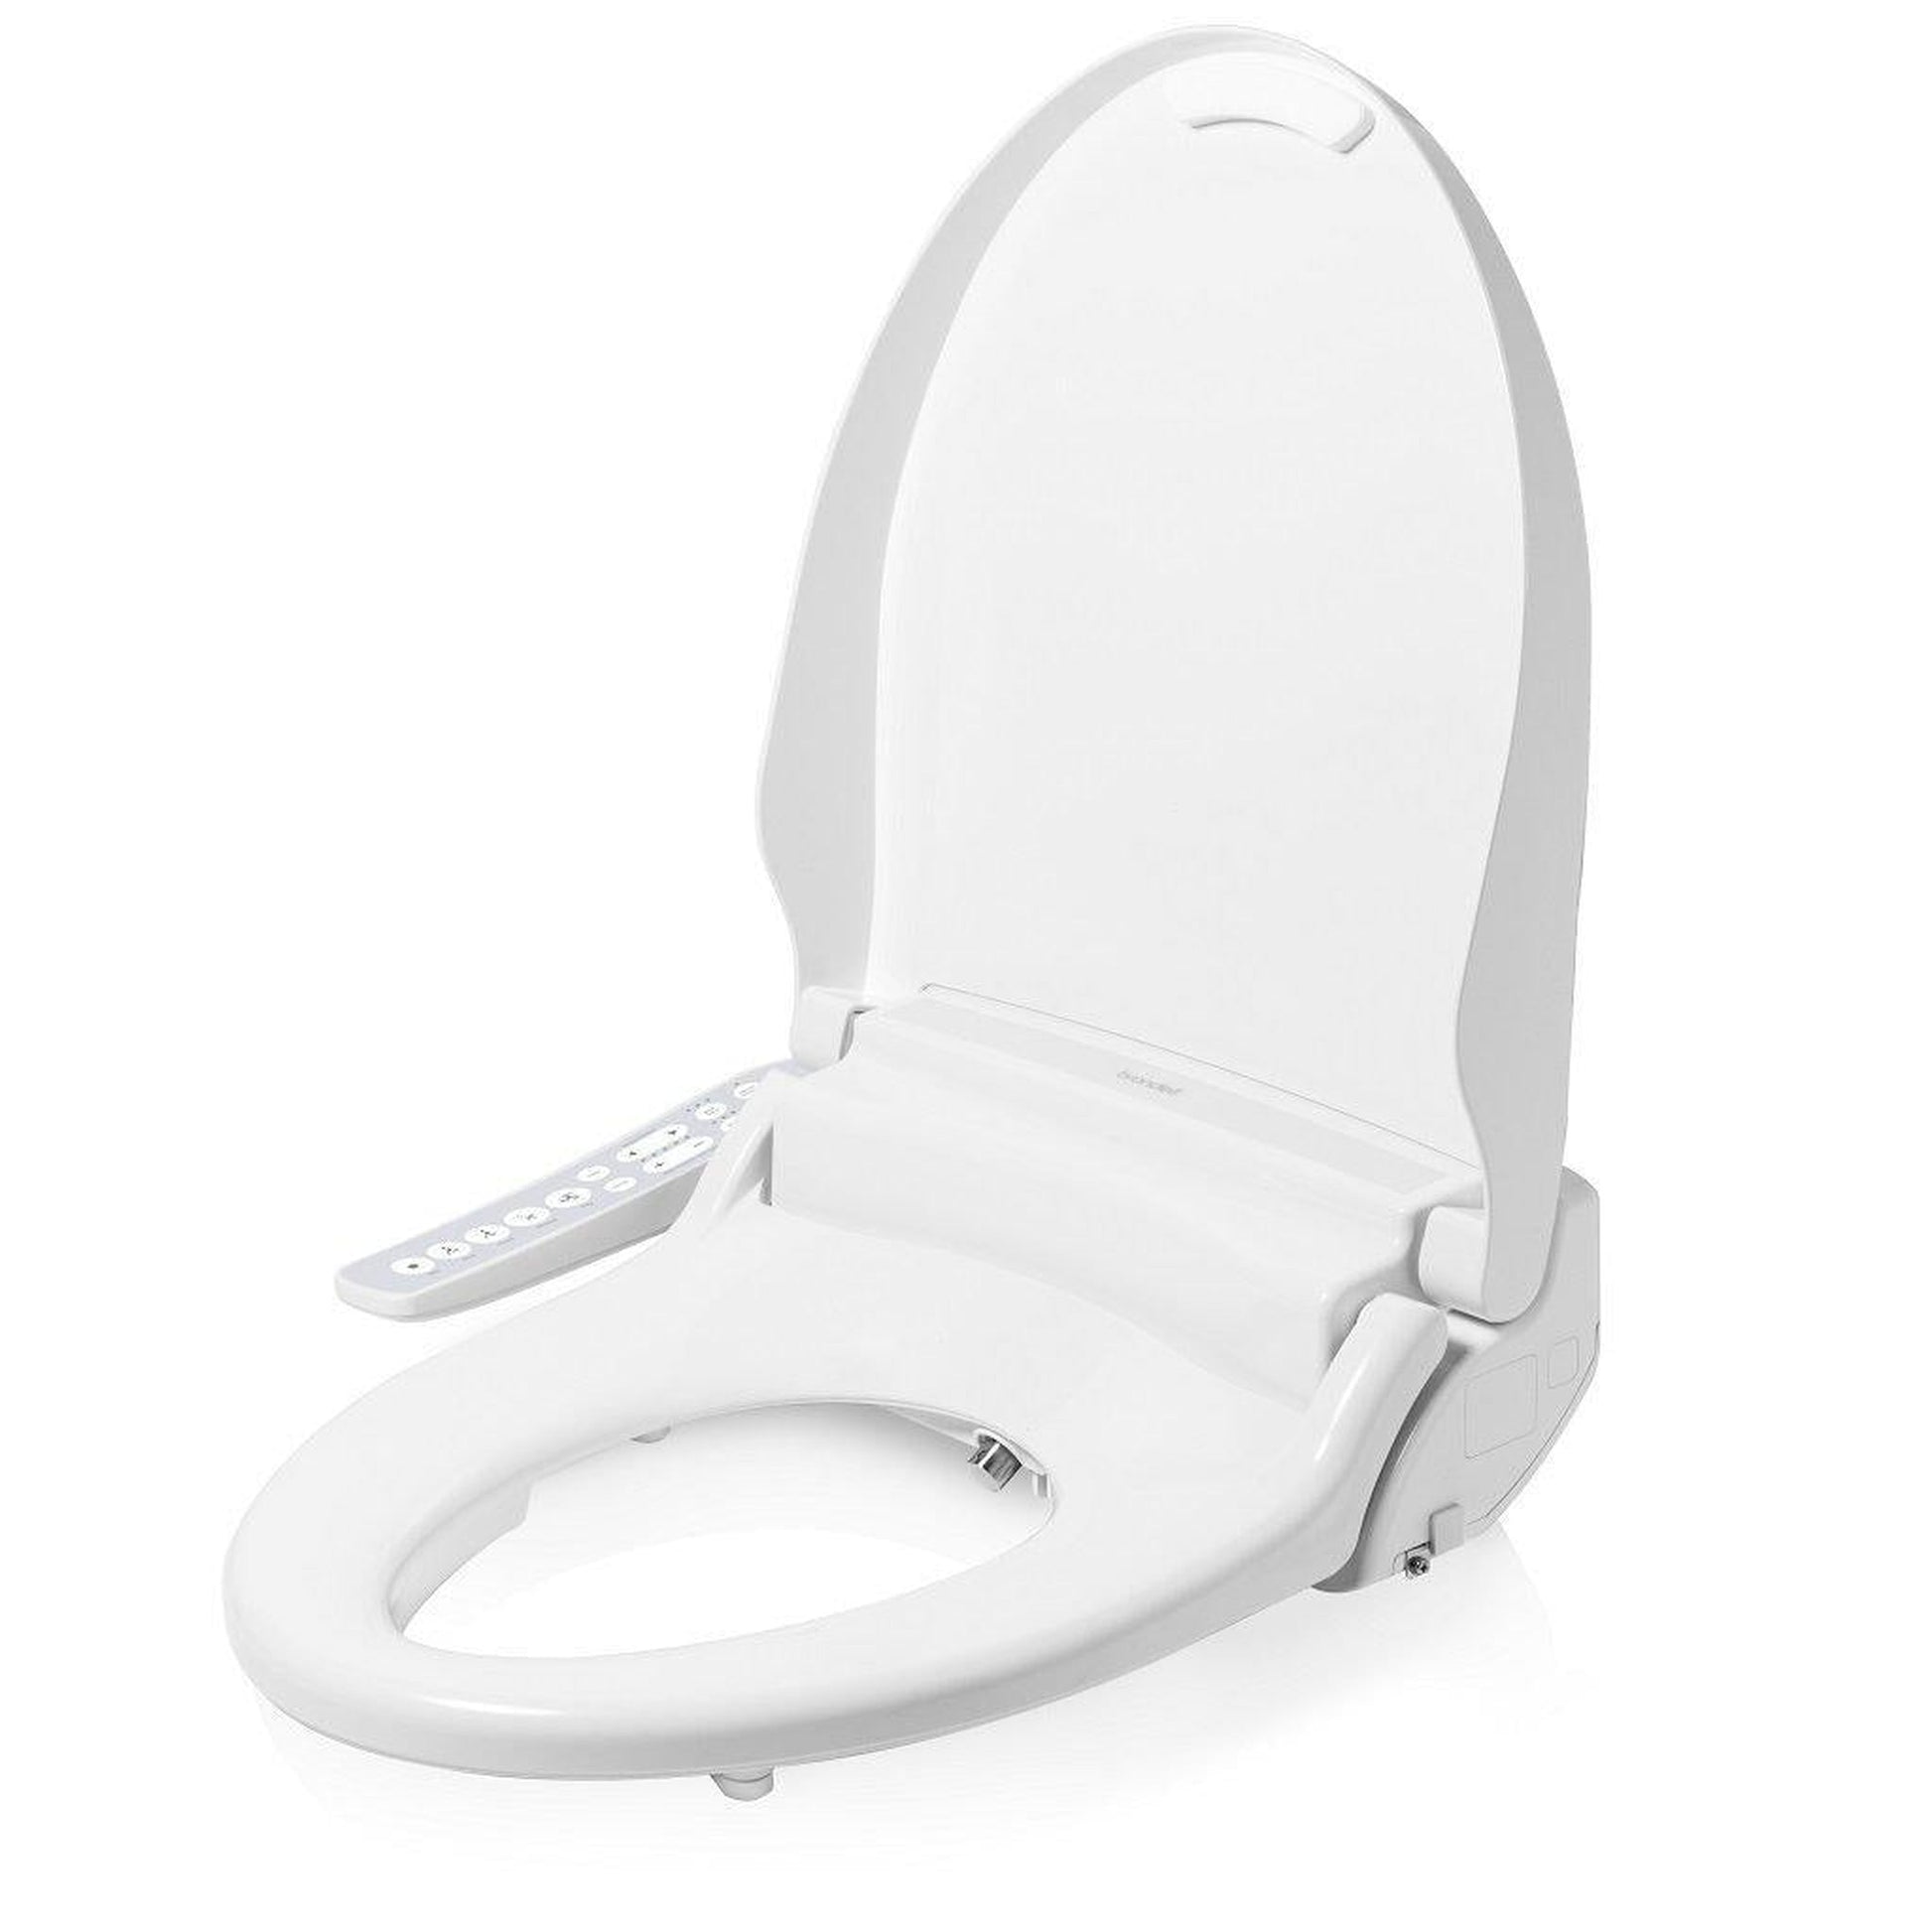 Brondell Swash Select DR801 20.7" White Elongated Electric Advanced Bidet Toilet Seat With Side Control Panel